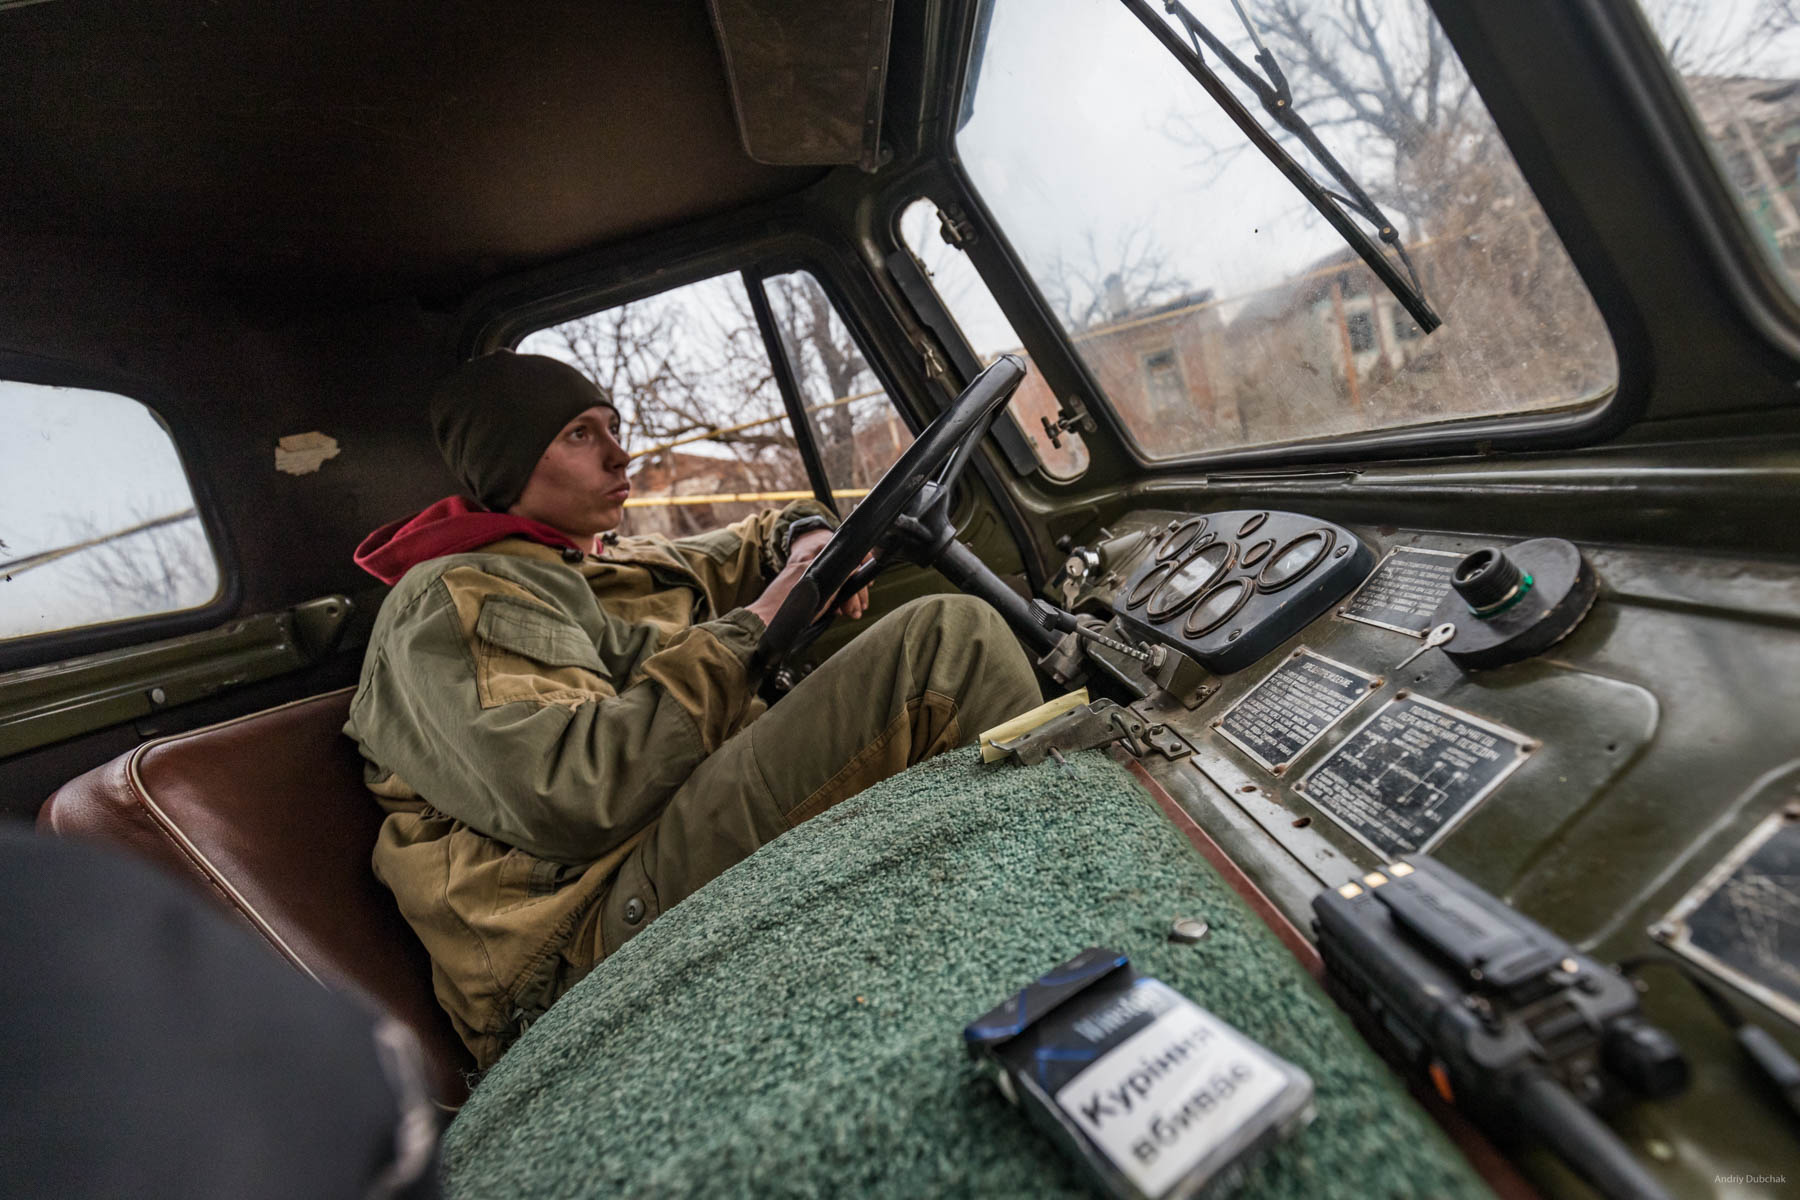 On his "Shishiha,"Driver, Vitaliy, (23 years old, native of Cherkassy region) delivered firewood to one of the front positions. In Shirokine, it was his second rotation. The front driver is a dangerous military profession, since transport is one of the main targets of gunfire, and the enemy shoots through the entrances to the front positions from all types of weapons. The main advice from Vitaly was - never panic! Shirokine, March 2018.